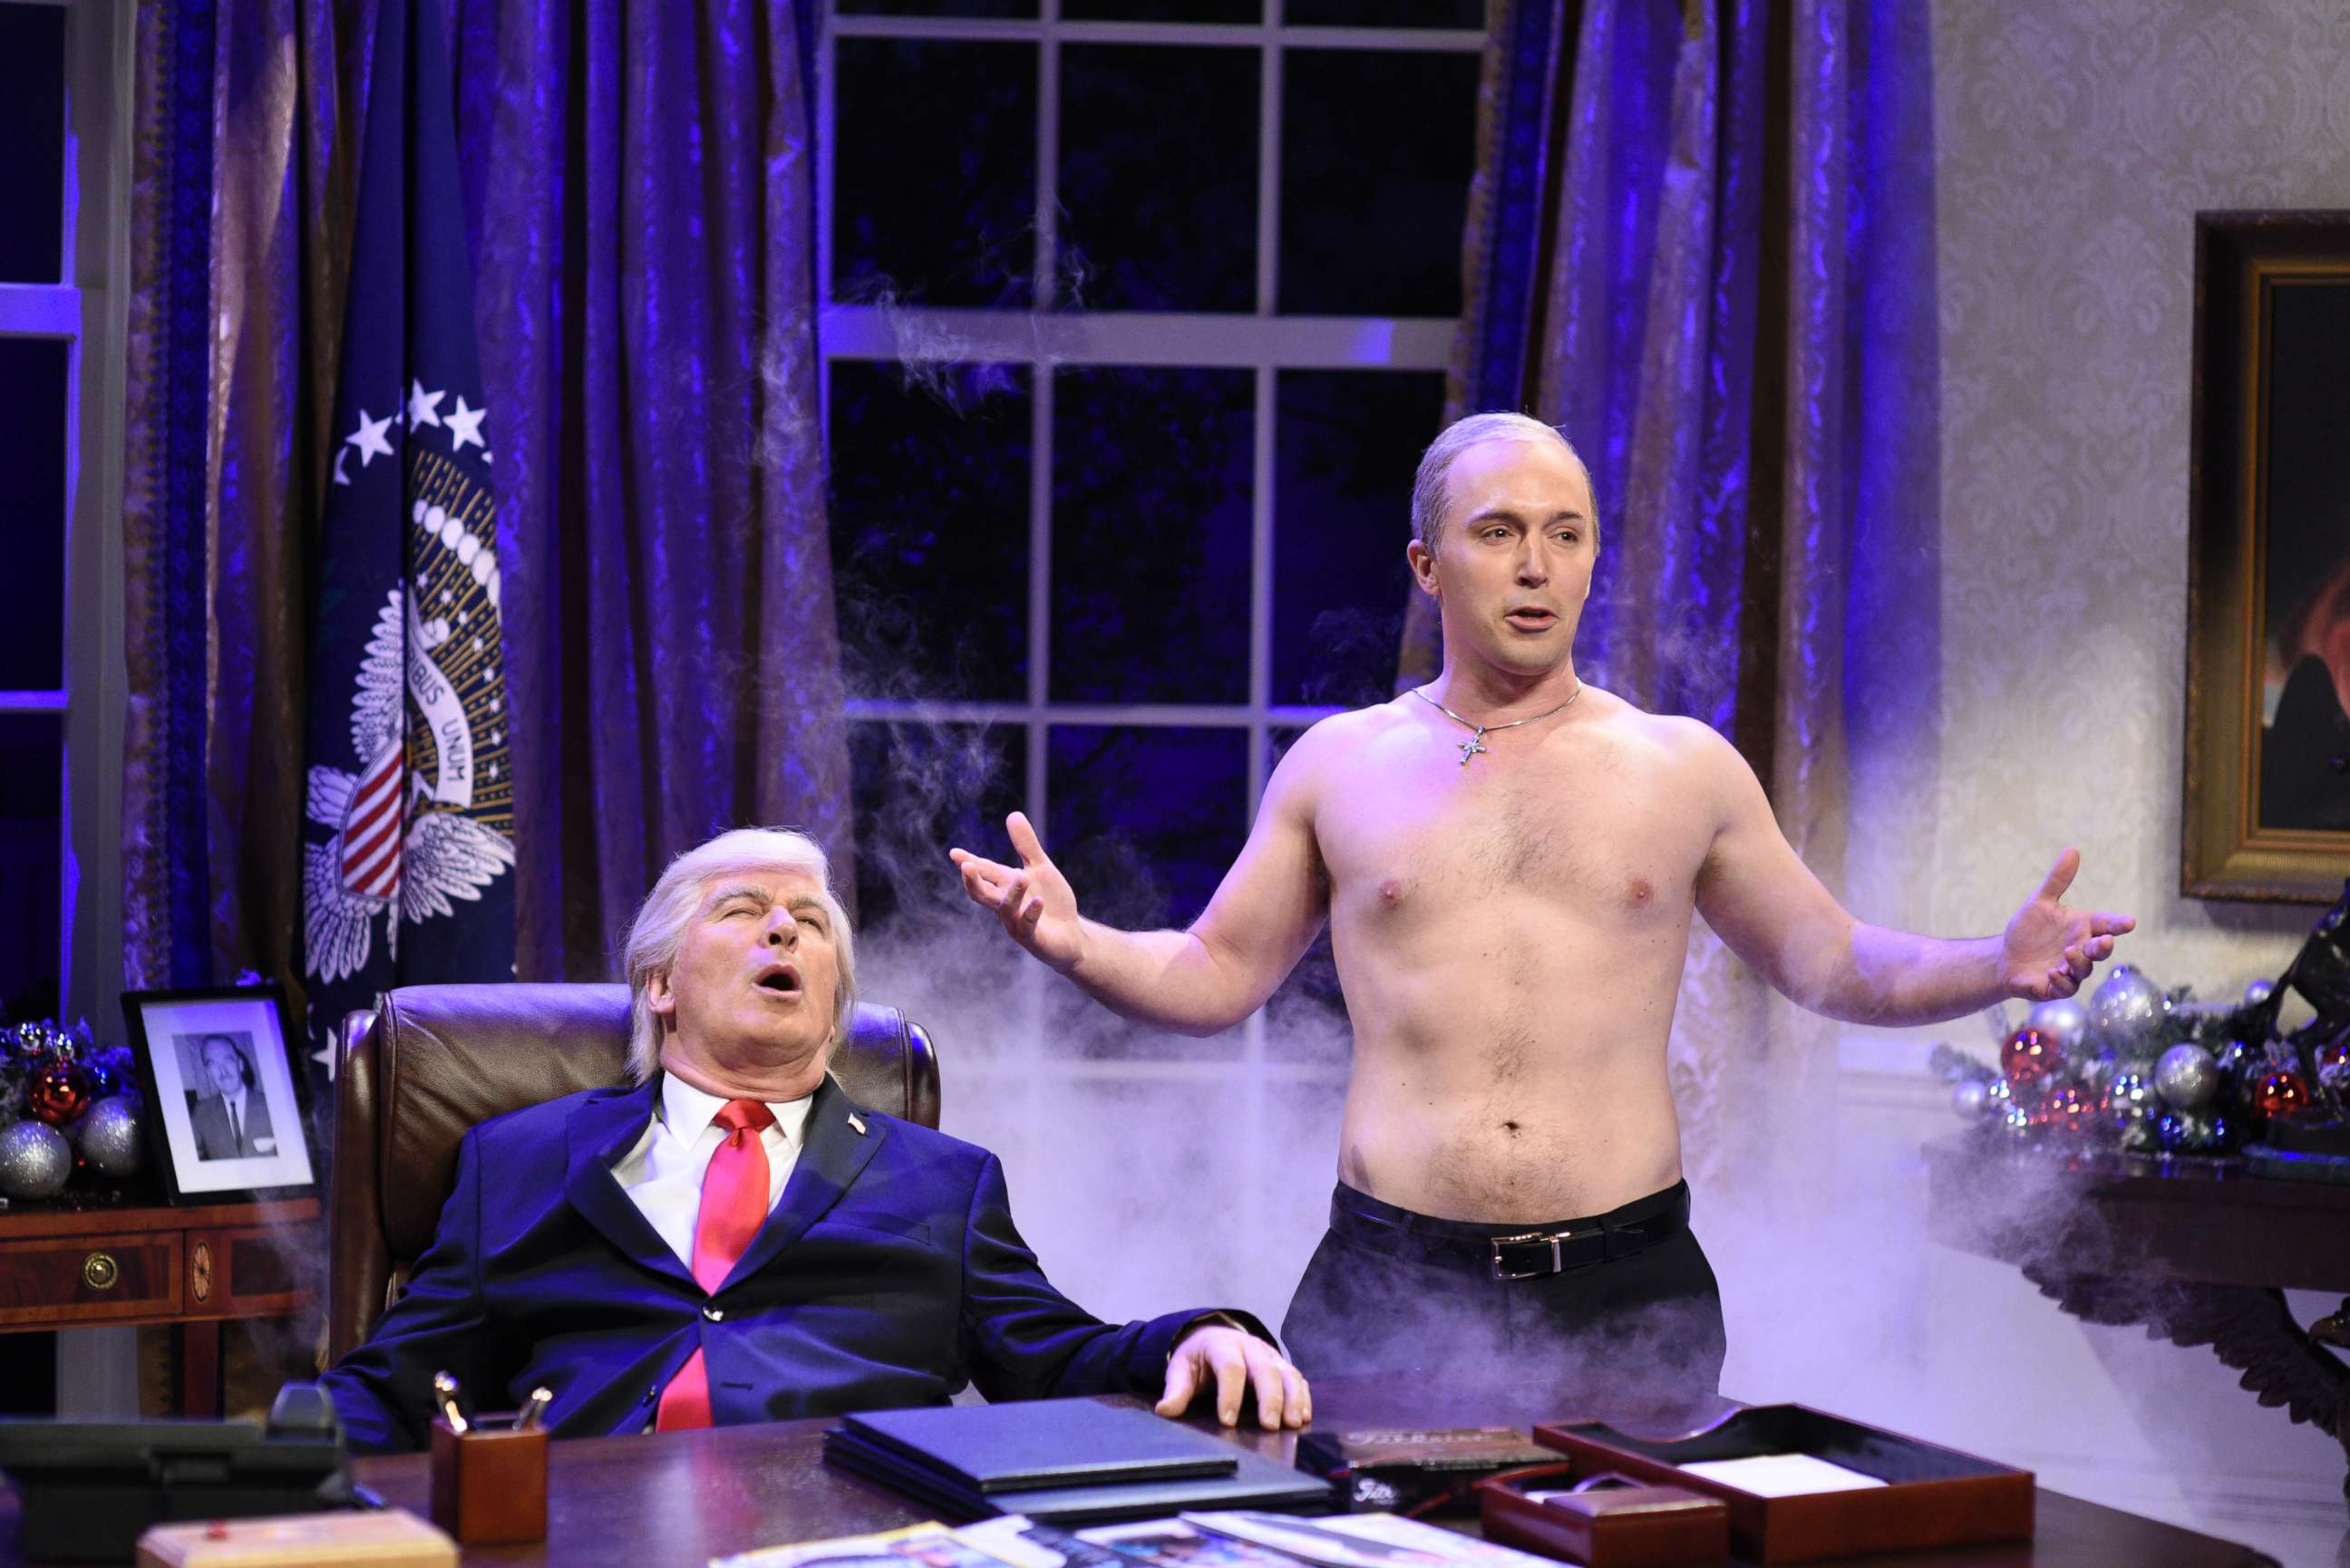 PHOTO: Pictured: (l-r) Beck Bennett as Russian President Vladimir Putin, Alec Baldwin as President Donald J. Trump during "White House Cold Open" in Studio 8H on Saturday, December 2, 2017